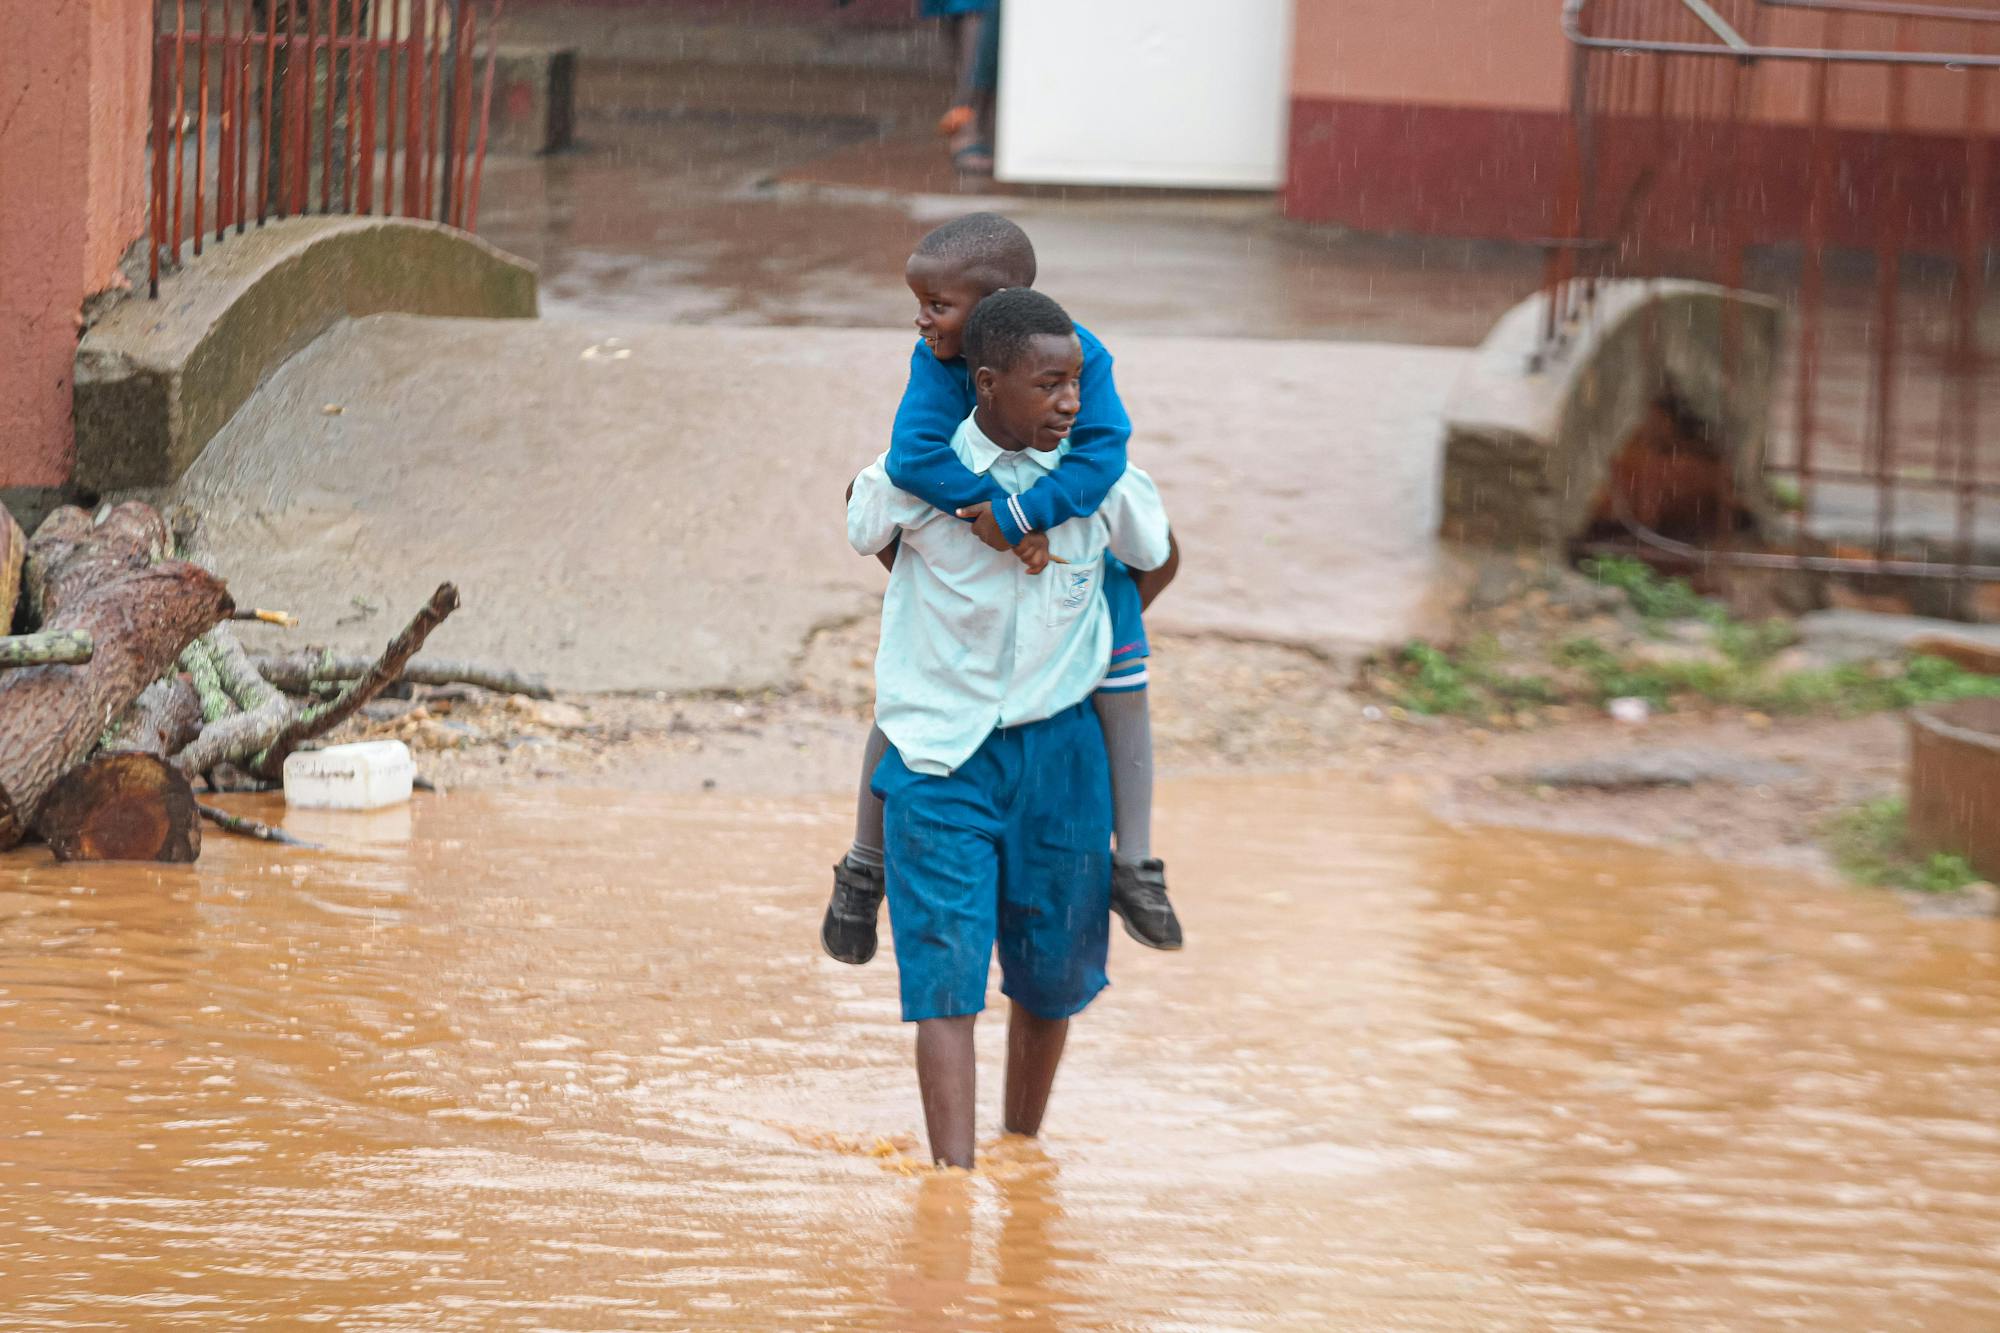 Young Man Carrying a Child Through a Flooded Street